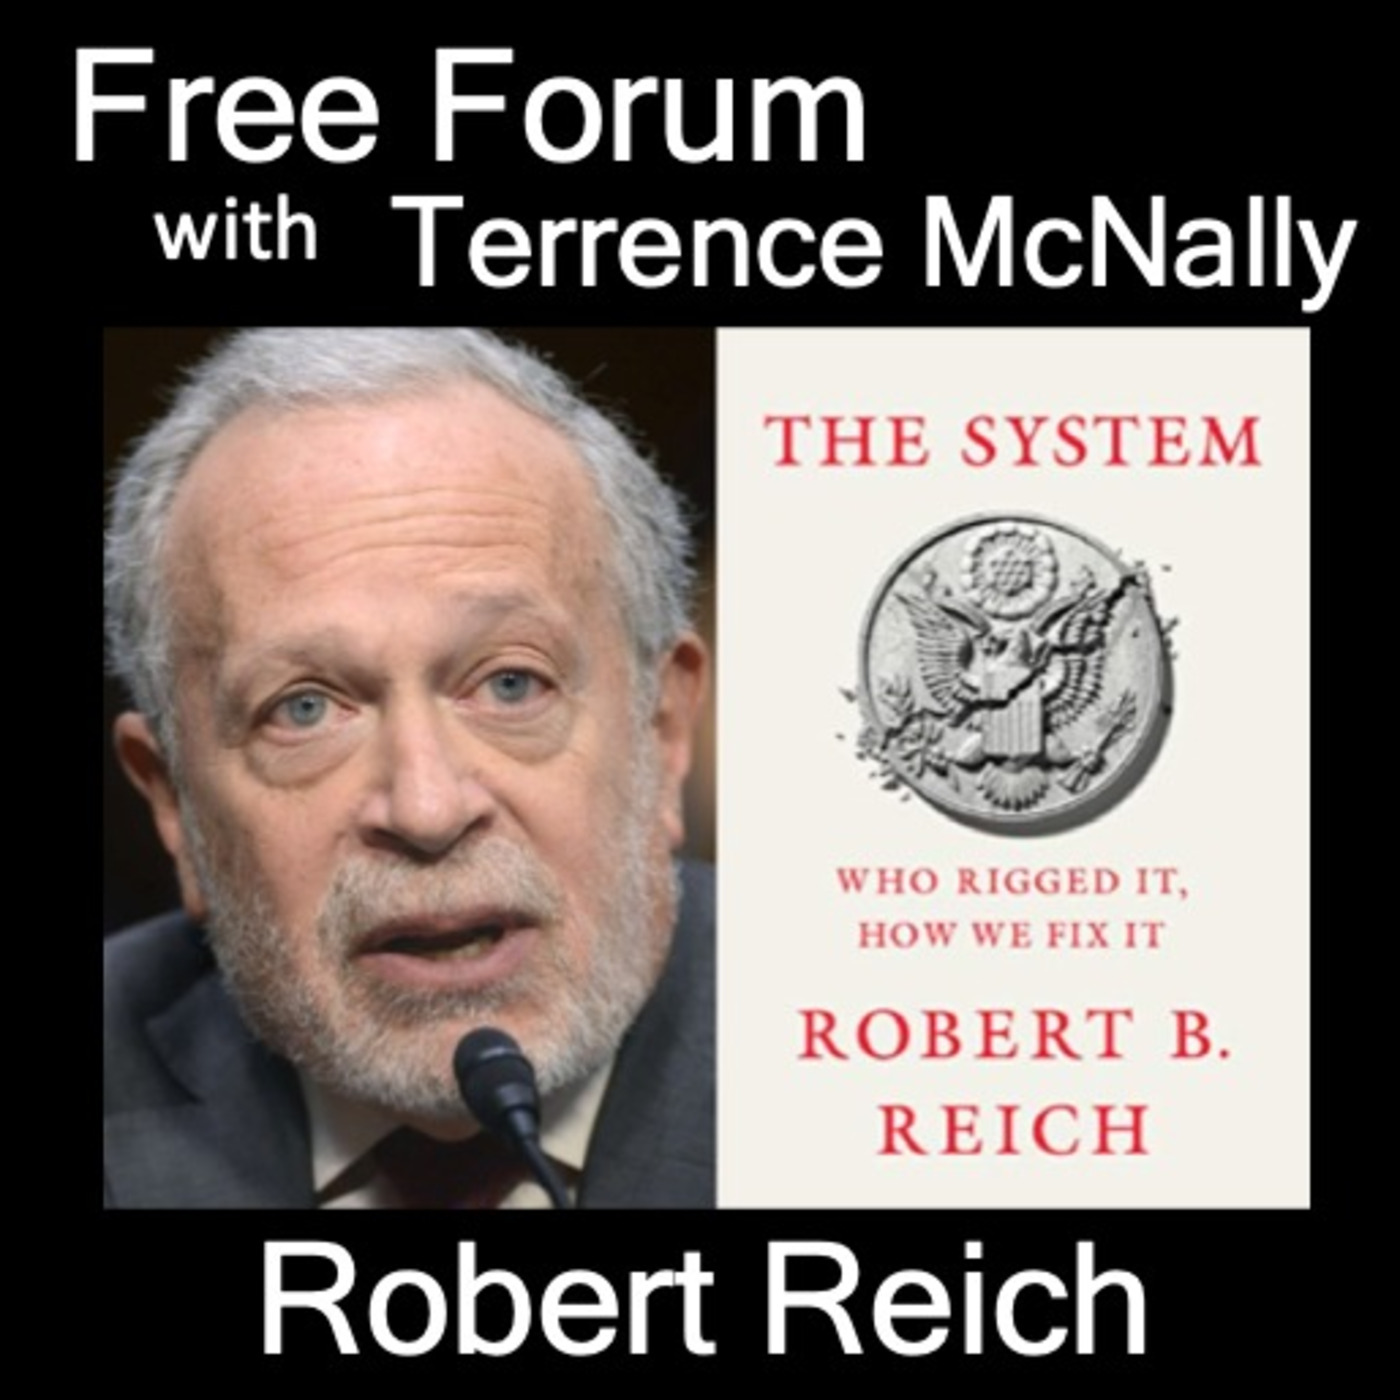 ROBERT REICH-Once the pandemic is over and Trump is defeated, the system will still be broken.Who rigged it and how do we fix it?